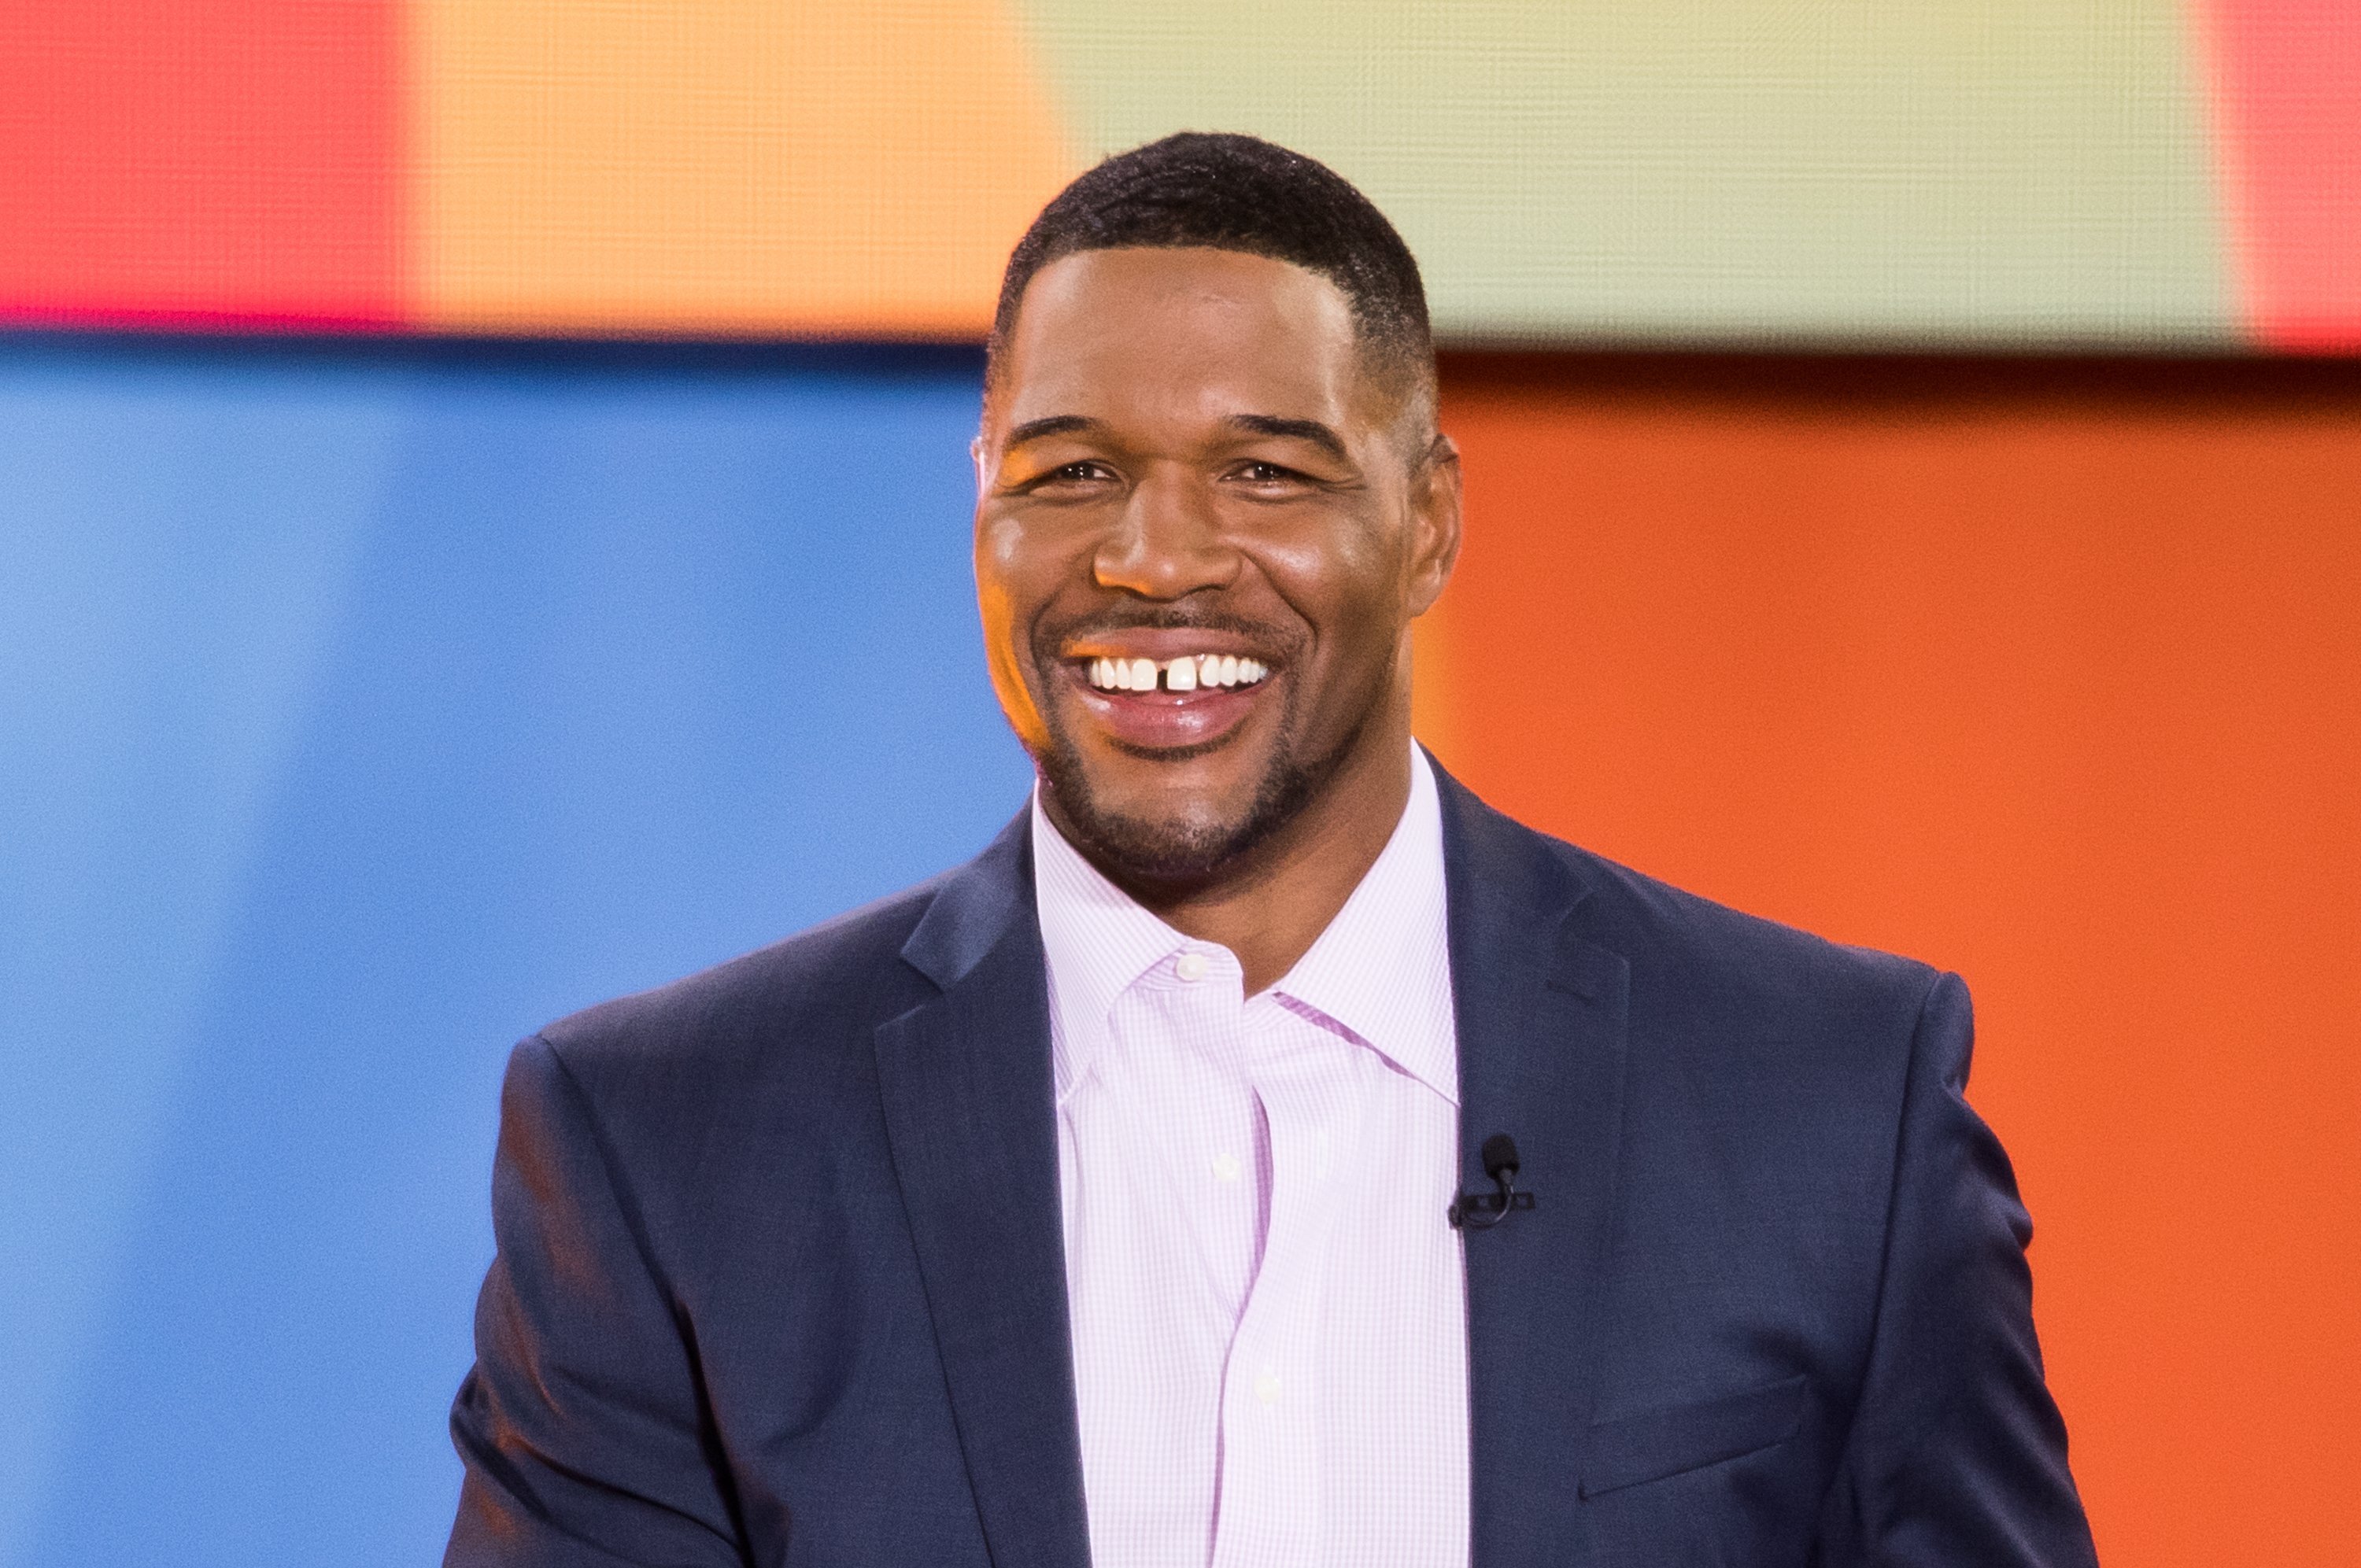 Michael Strahan at ABC's "Good Morning America" at Rumsey Playfield, Central Park on July 6, 2018 l Source: Getty Images